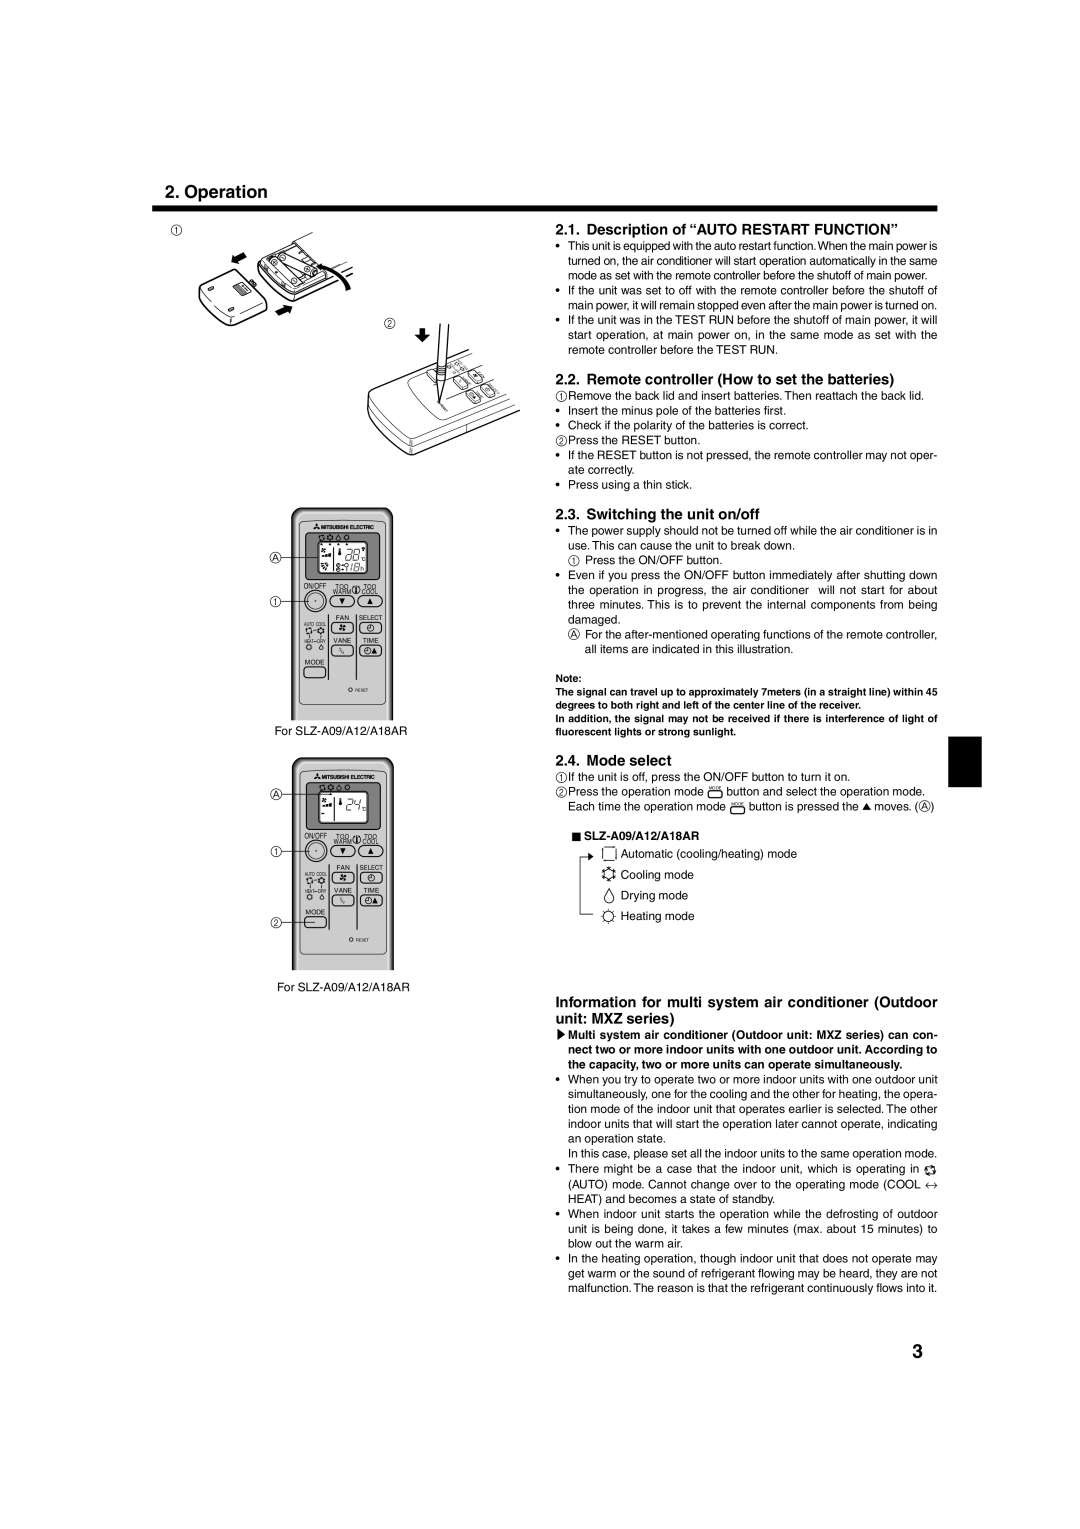 Mitsubishi Electronics SLZ-A09 Operation, Description of “AUTO RESTART FUNCTION”, Switching the unit on/off, Mode select 